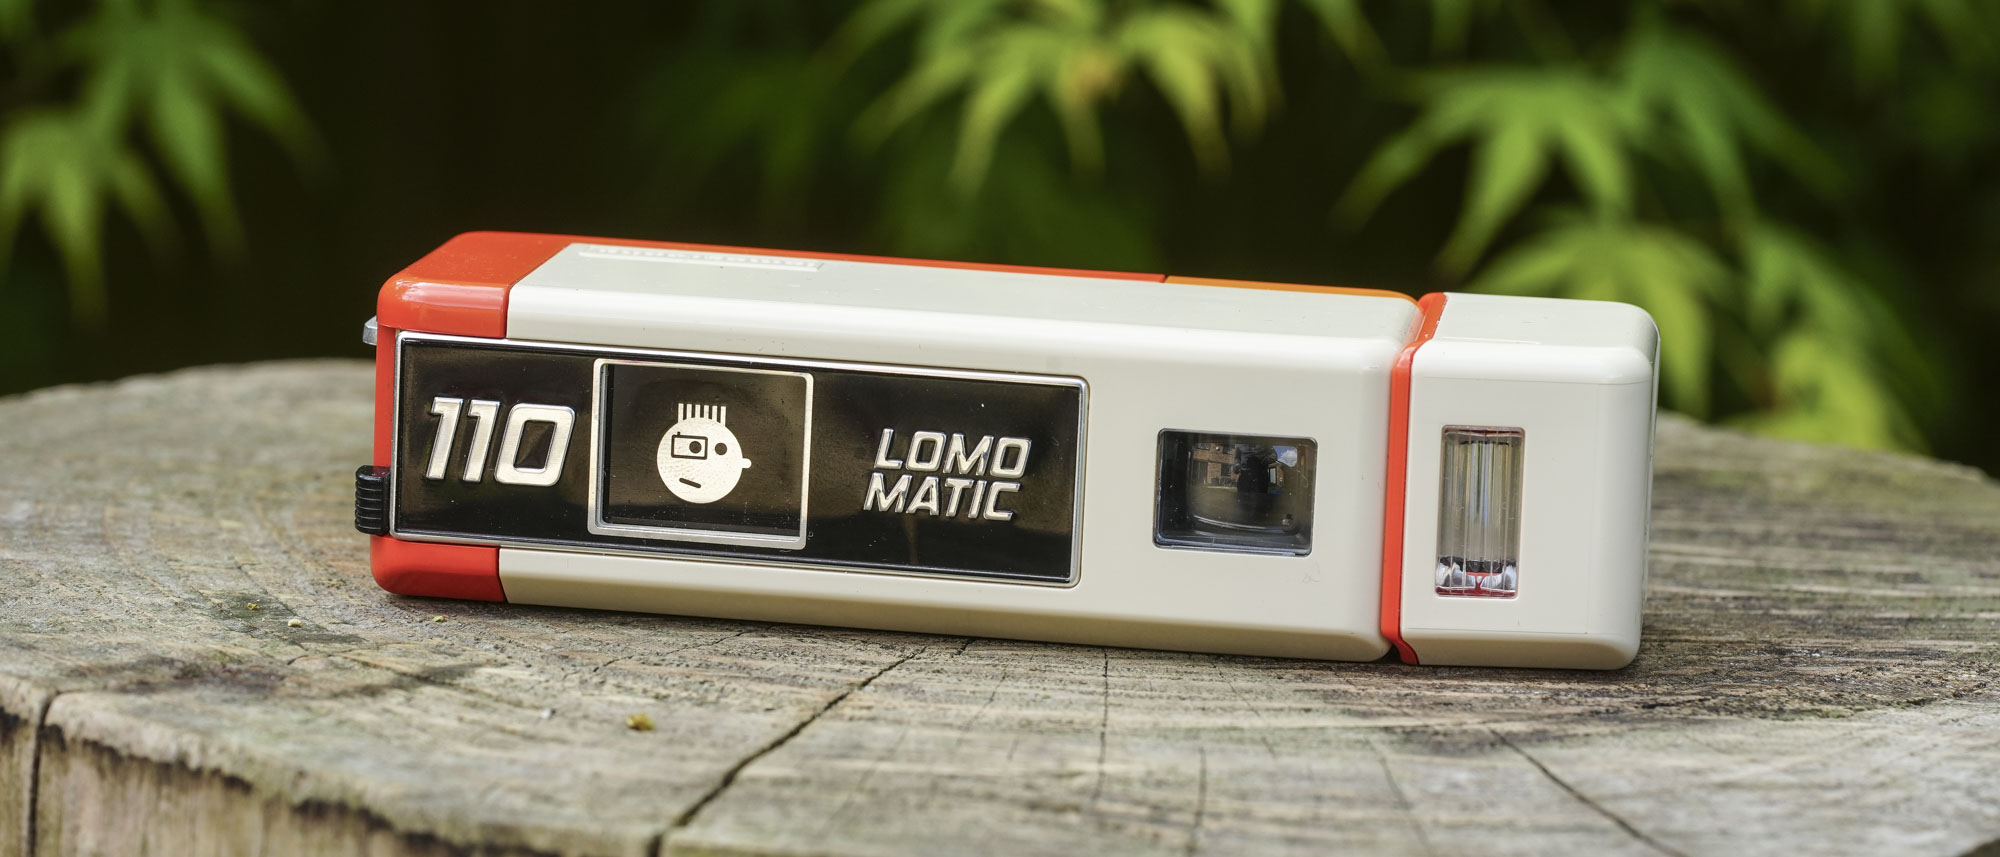 A close up image showing the controls of the Lomography Lomomatic 110 film camera